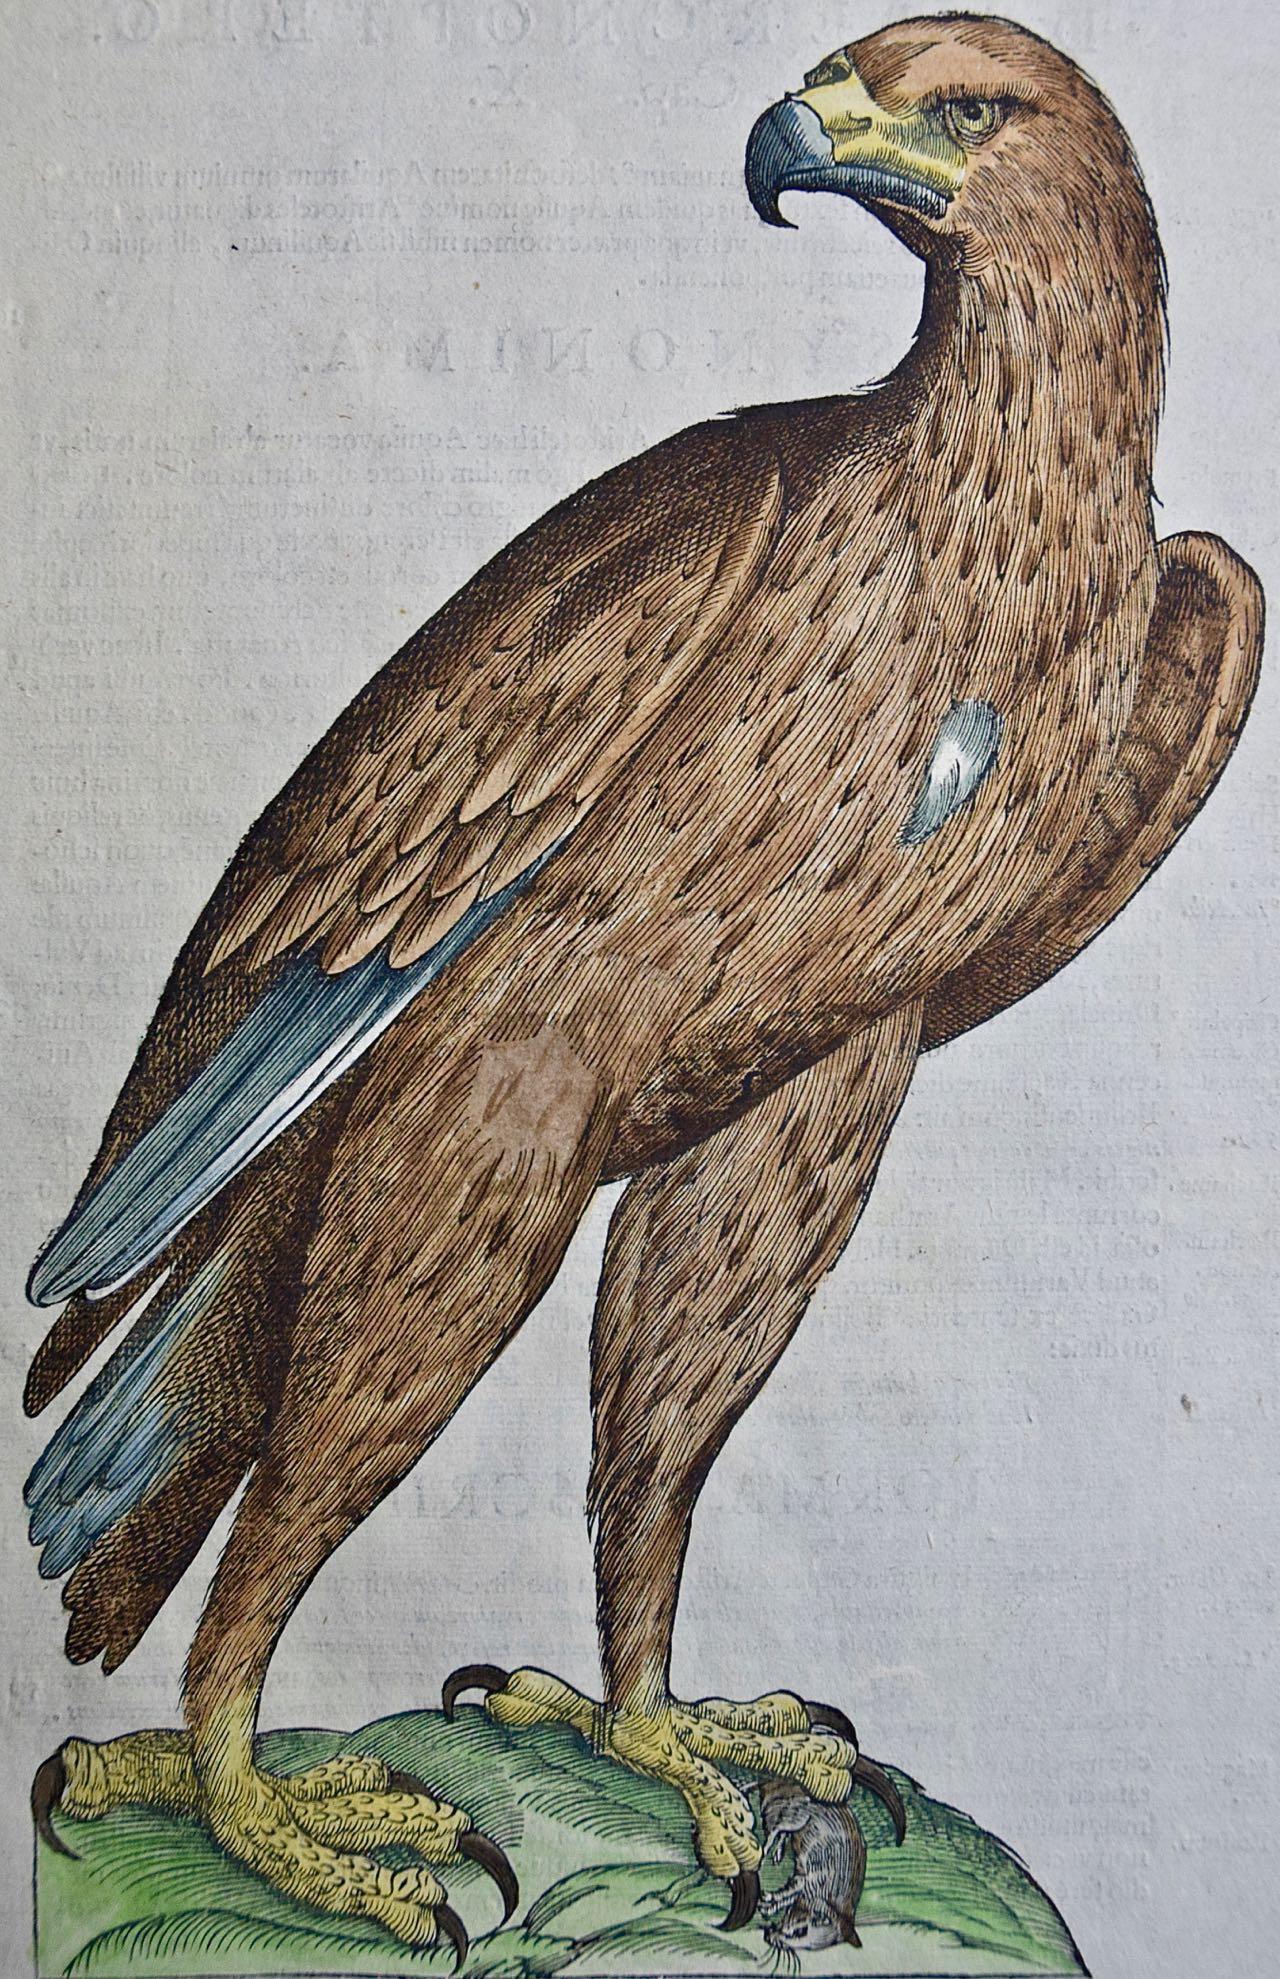 Eagle: A 16th/17th Century Hand-colored Engraving by Aldrovandi - Print by Ulisse Aldrovandi